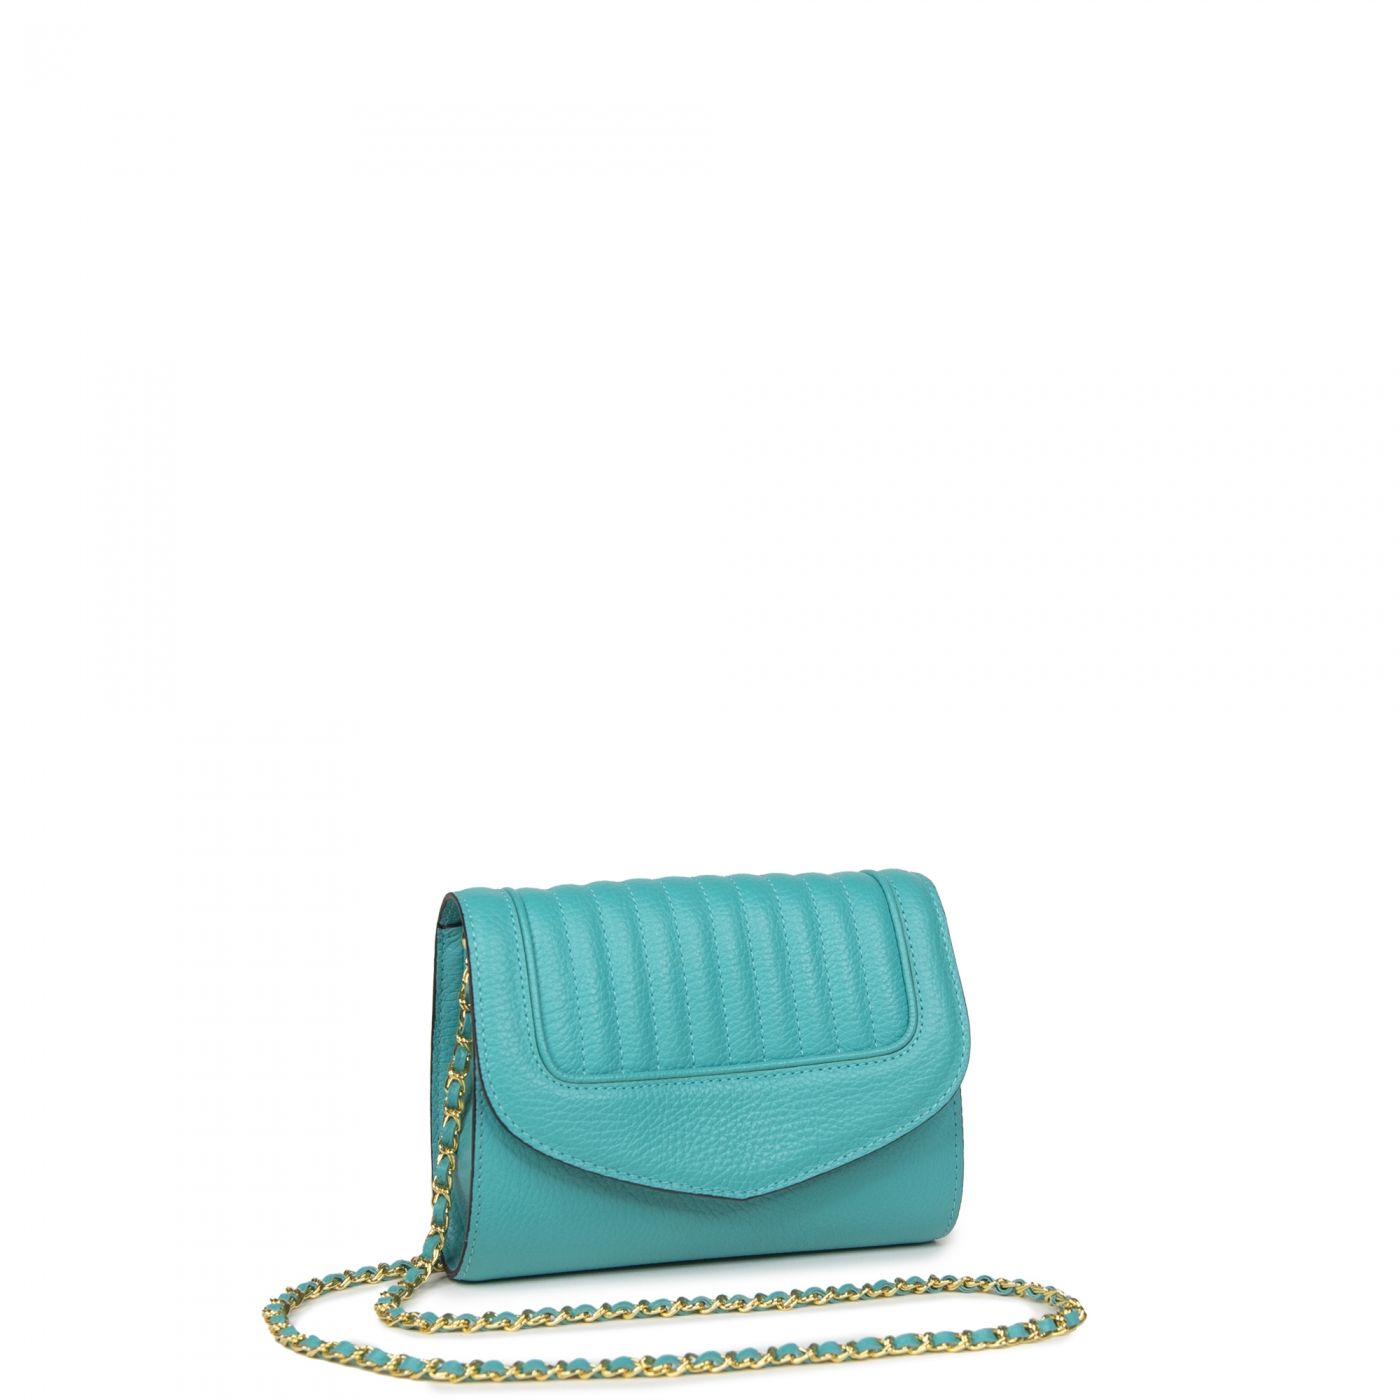 Clutch bag Jeanne PM Blue Turquoise